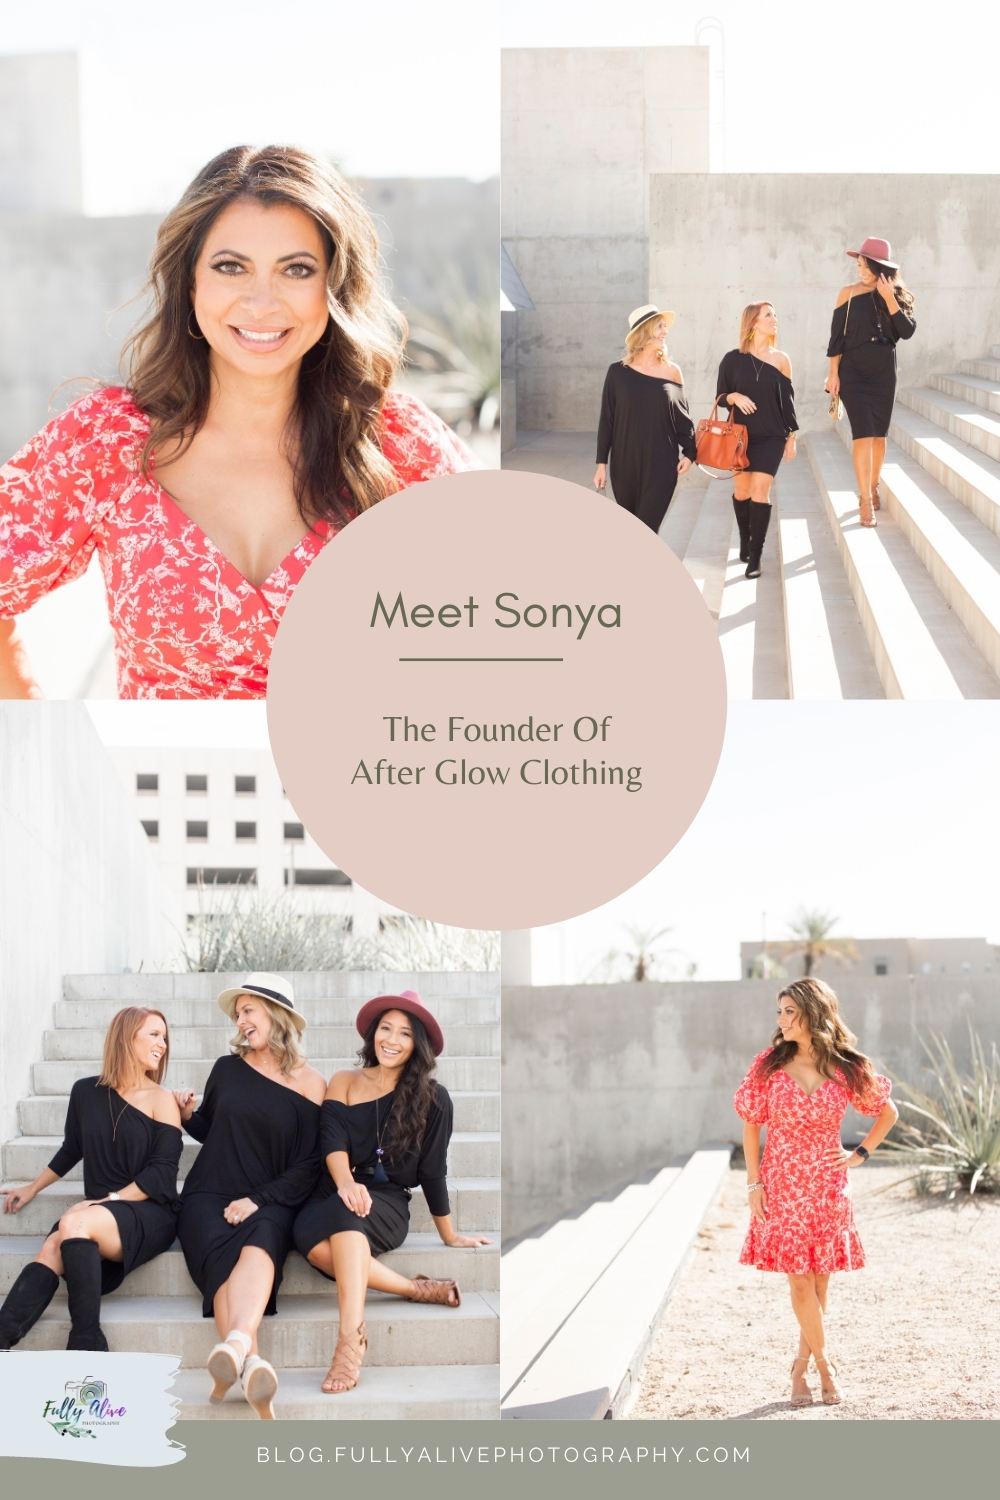 Meet Sonya The Founder Of After Glow Clothing By Fully Alive Photography